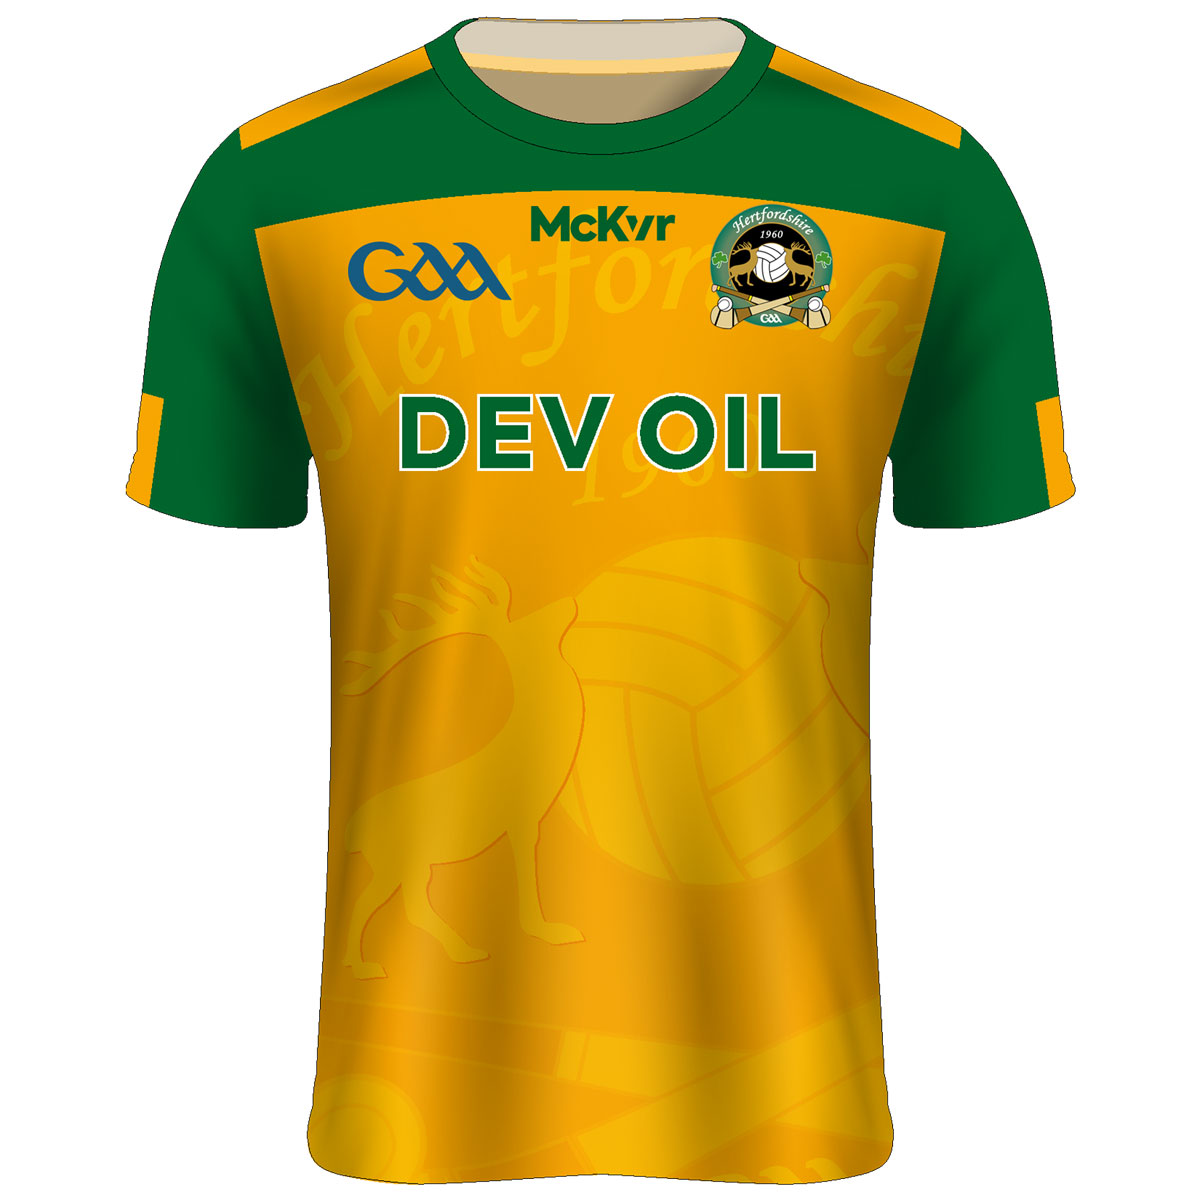 Mc Keever Hertfordshire GAA Playing Jersey - Adult - Amber